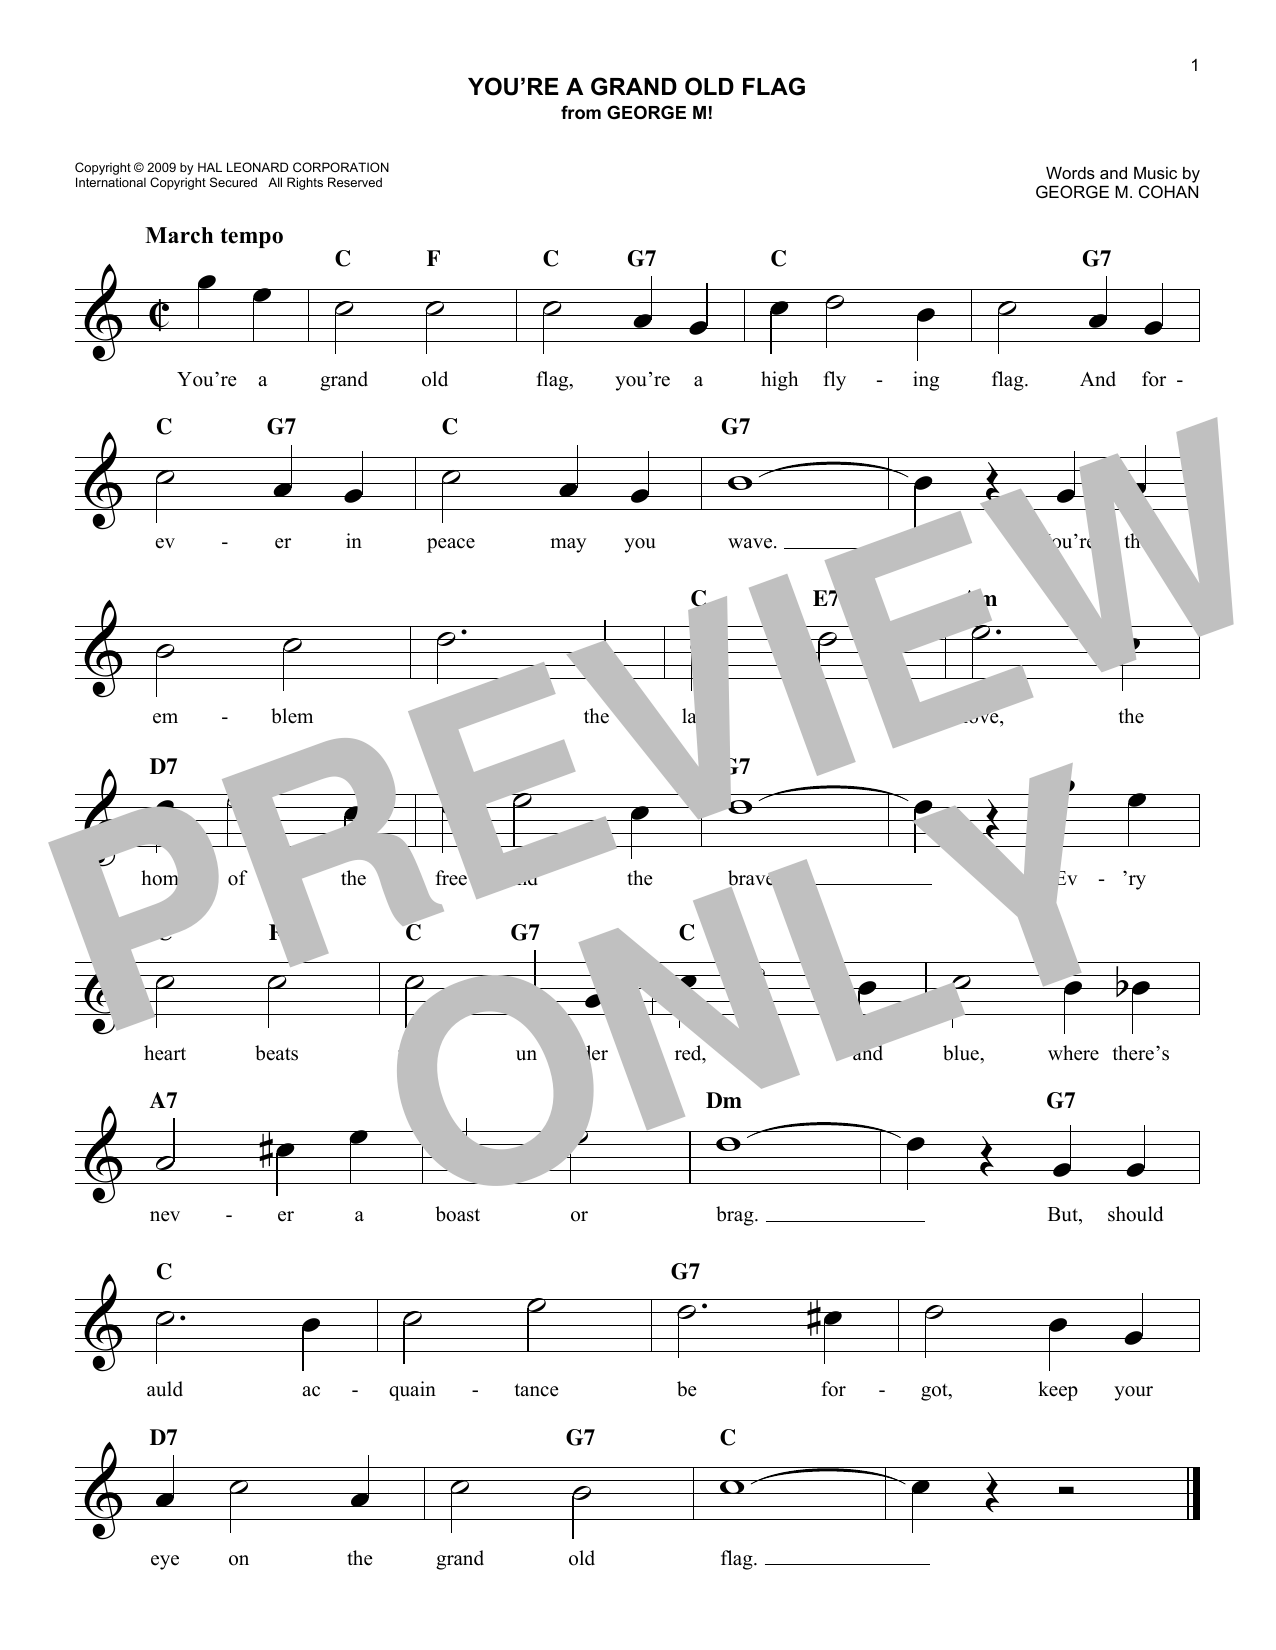 Download George Cohan You're A Grand Old Flag Sheet Music